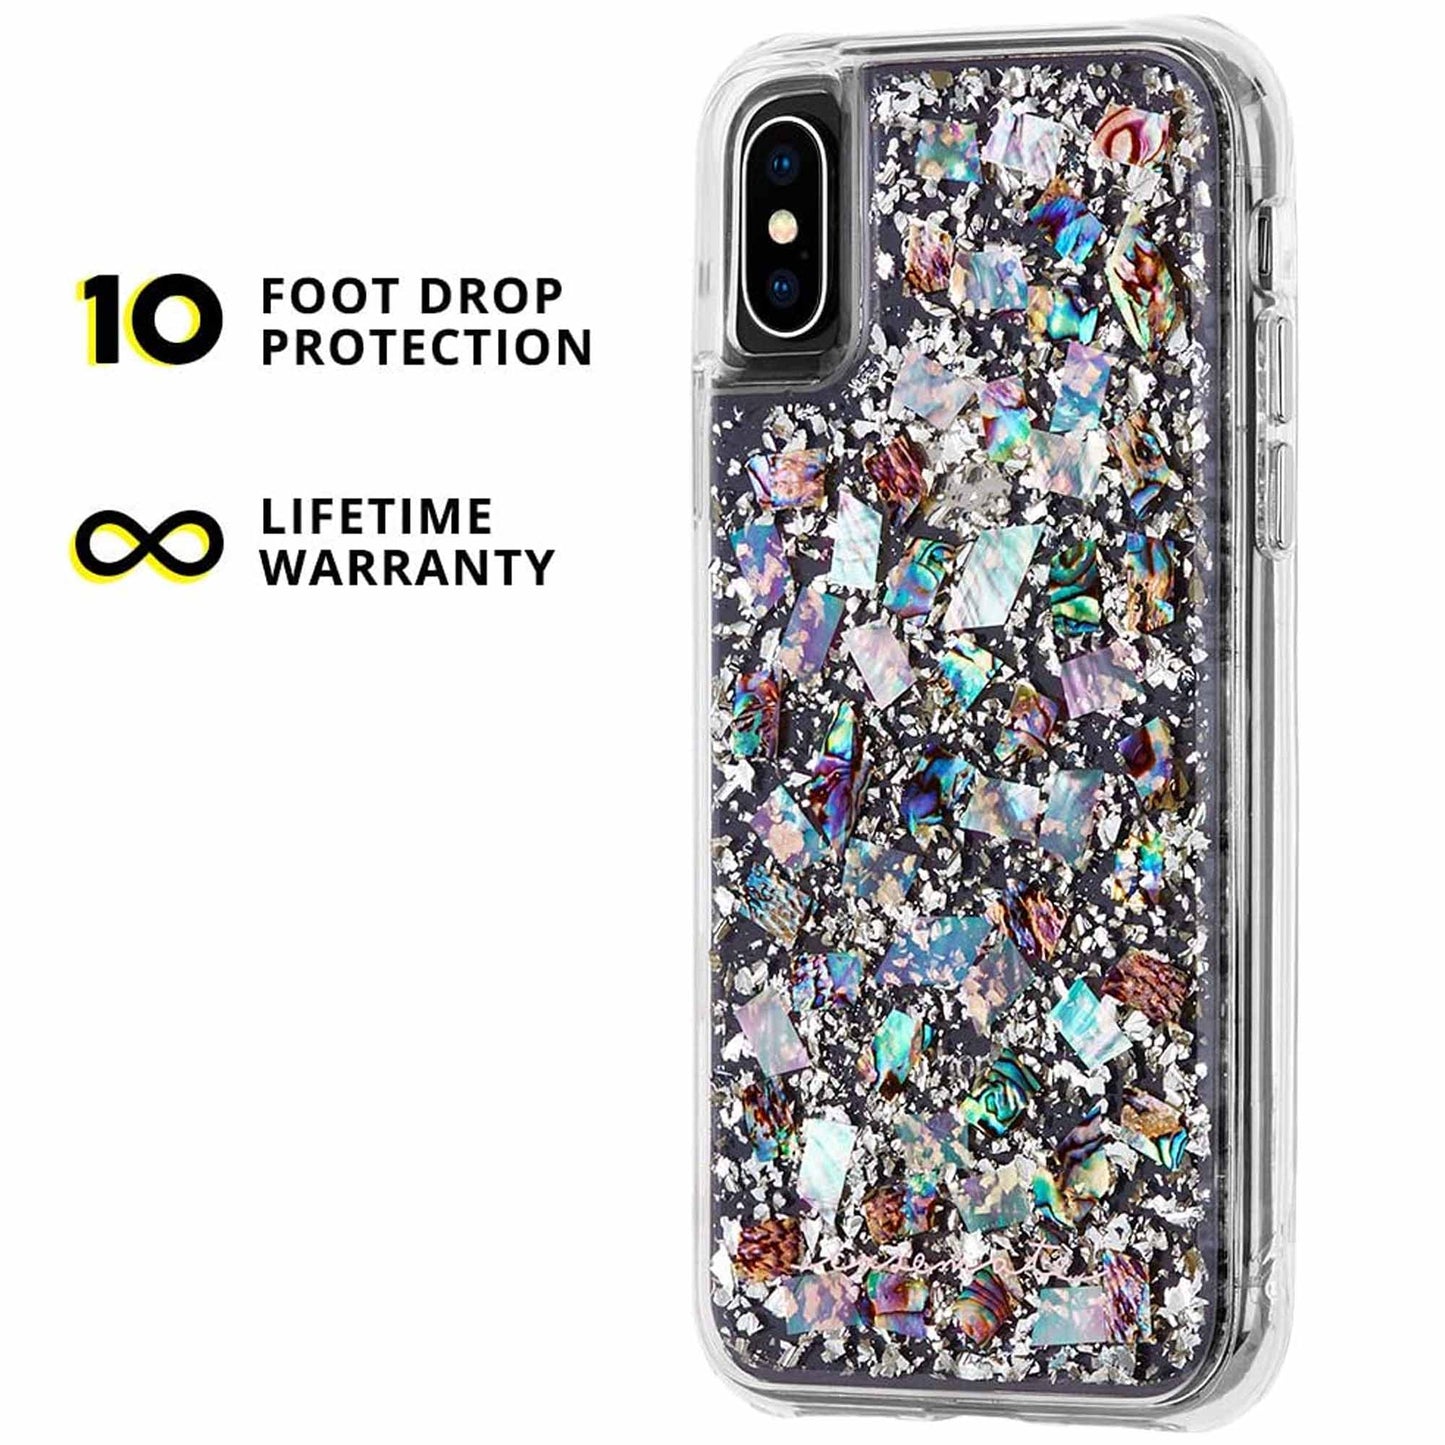 Case-Mate Karat for iPhone Xs - Pearl (Barcode: 846127179676 )